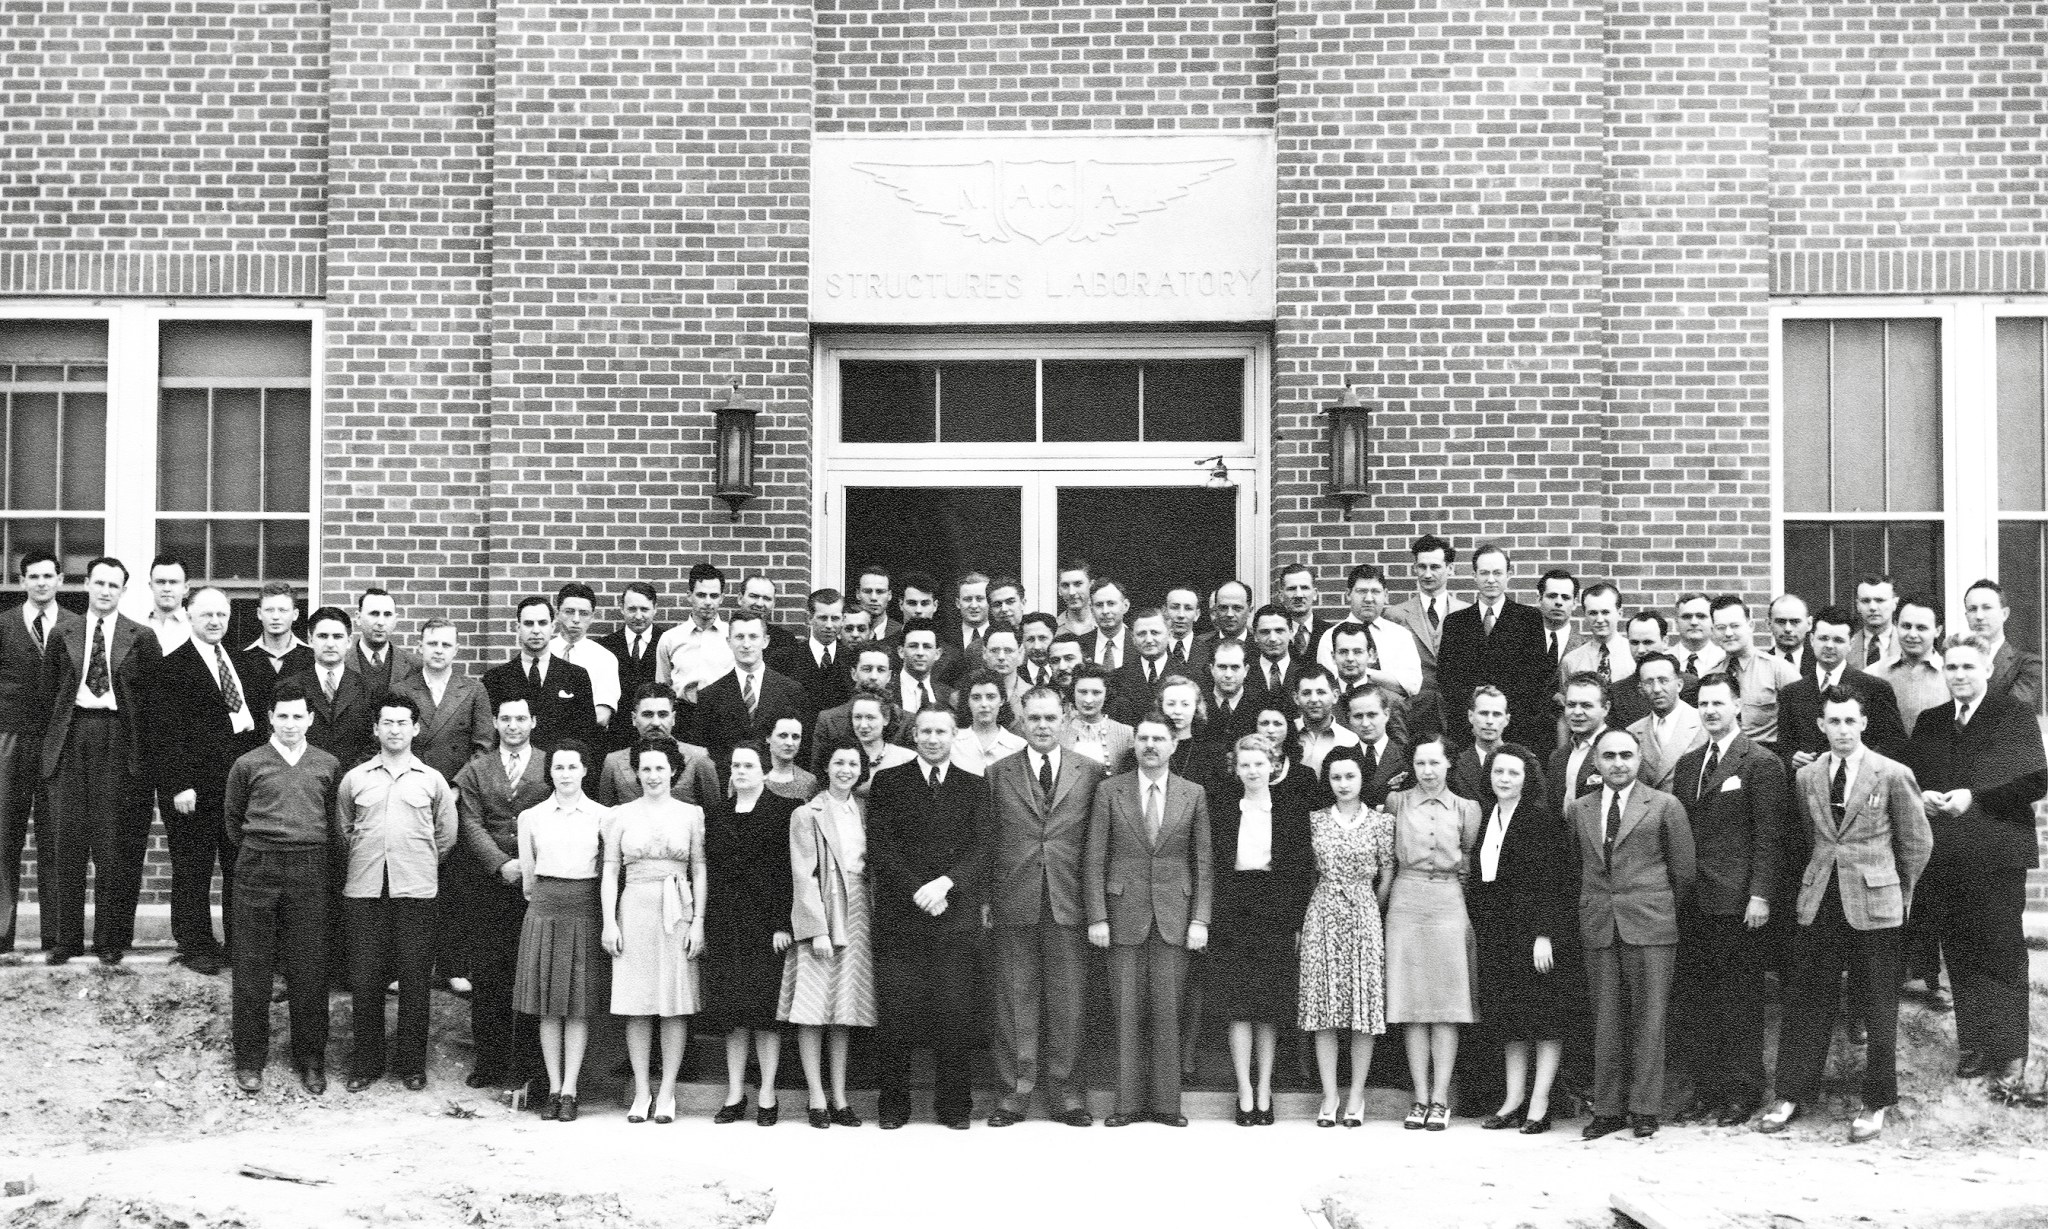 Group of people posing in front of building.